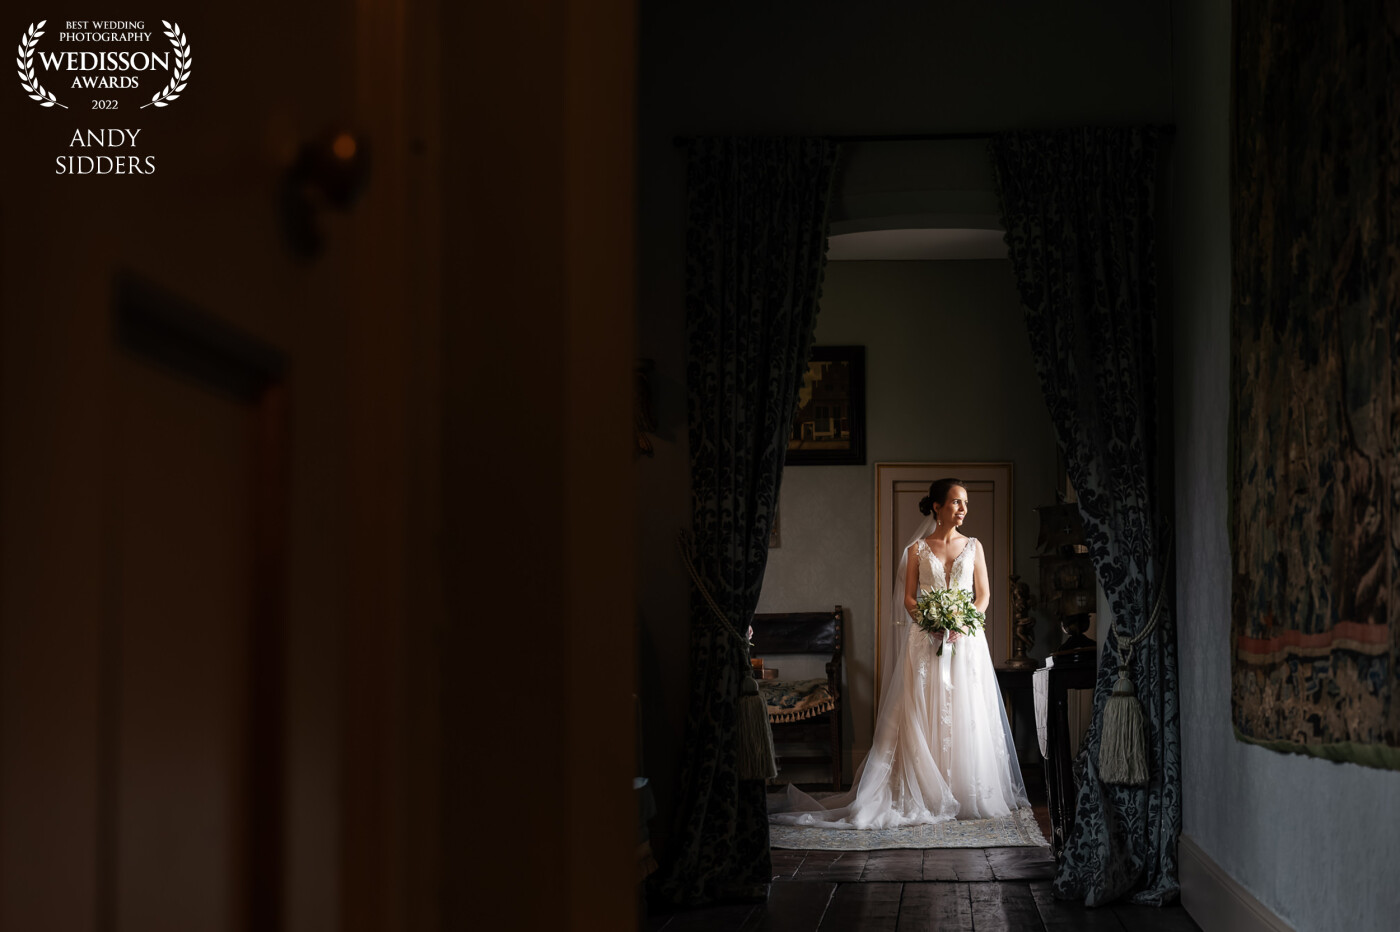 This portrait was taken at Chenies Manor in Buckinghamshire, UK. I positioned the bride in beautiful window light and instructed her to look out the window.